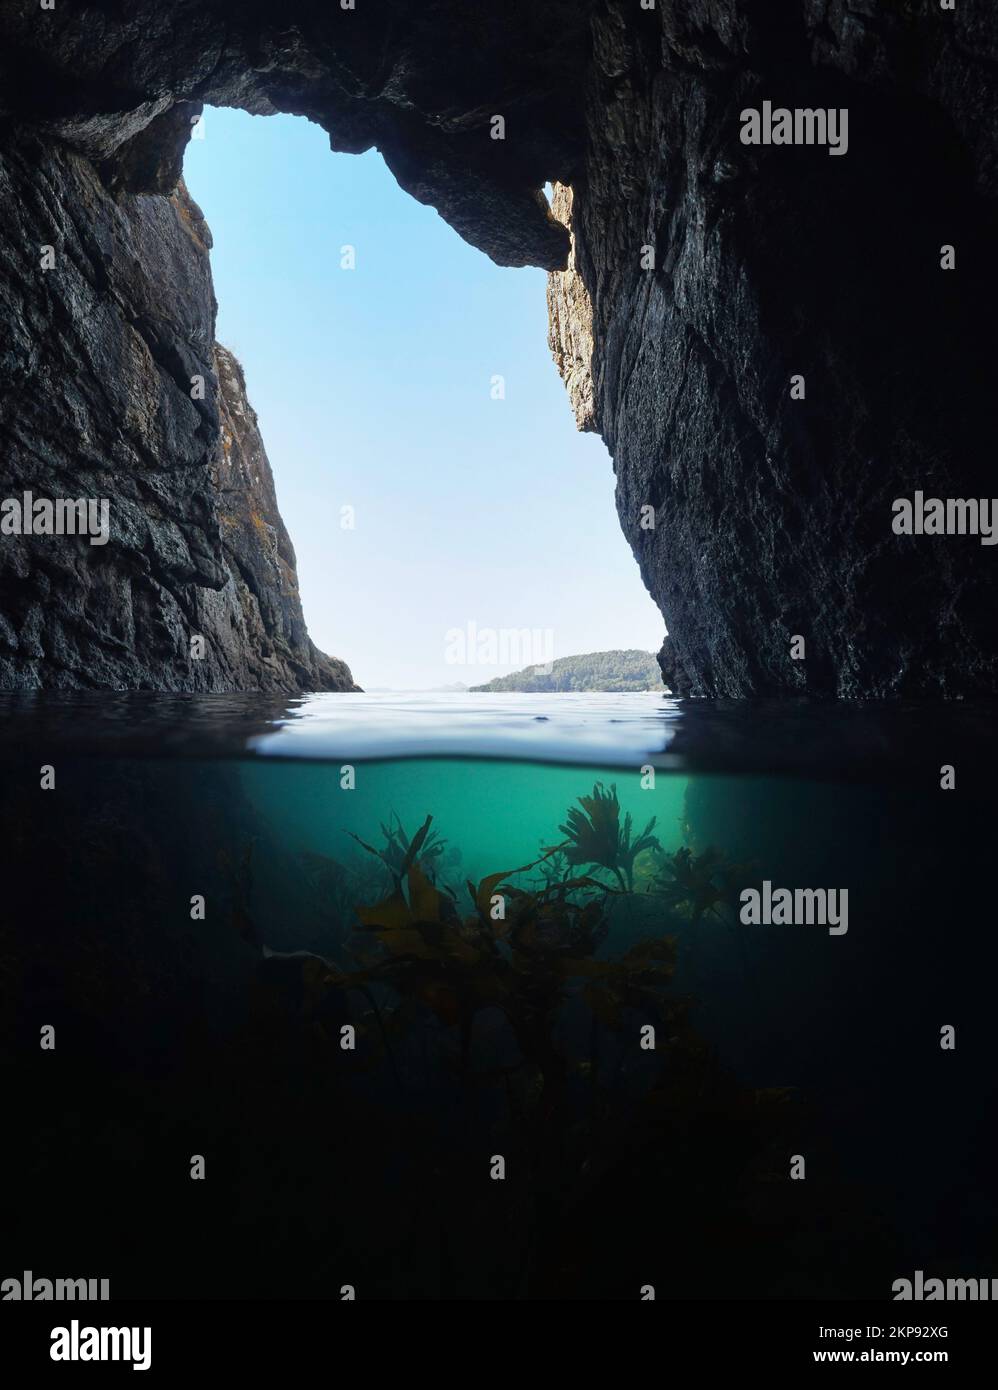 Cave on the sea shore with kelp underwater, Atlantic ocean, seascape over and under water surface, Spain, Galicia, Rias Baixas Stock Photo